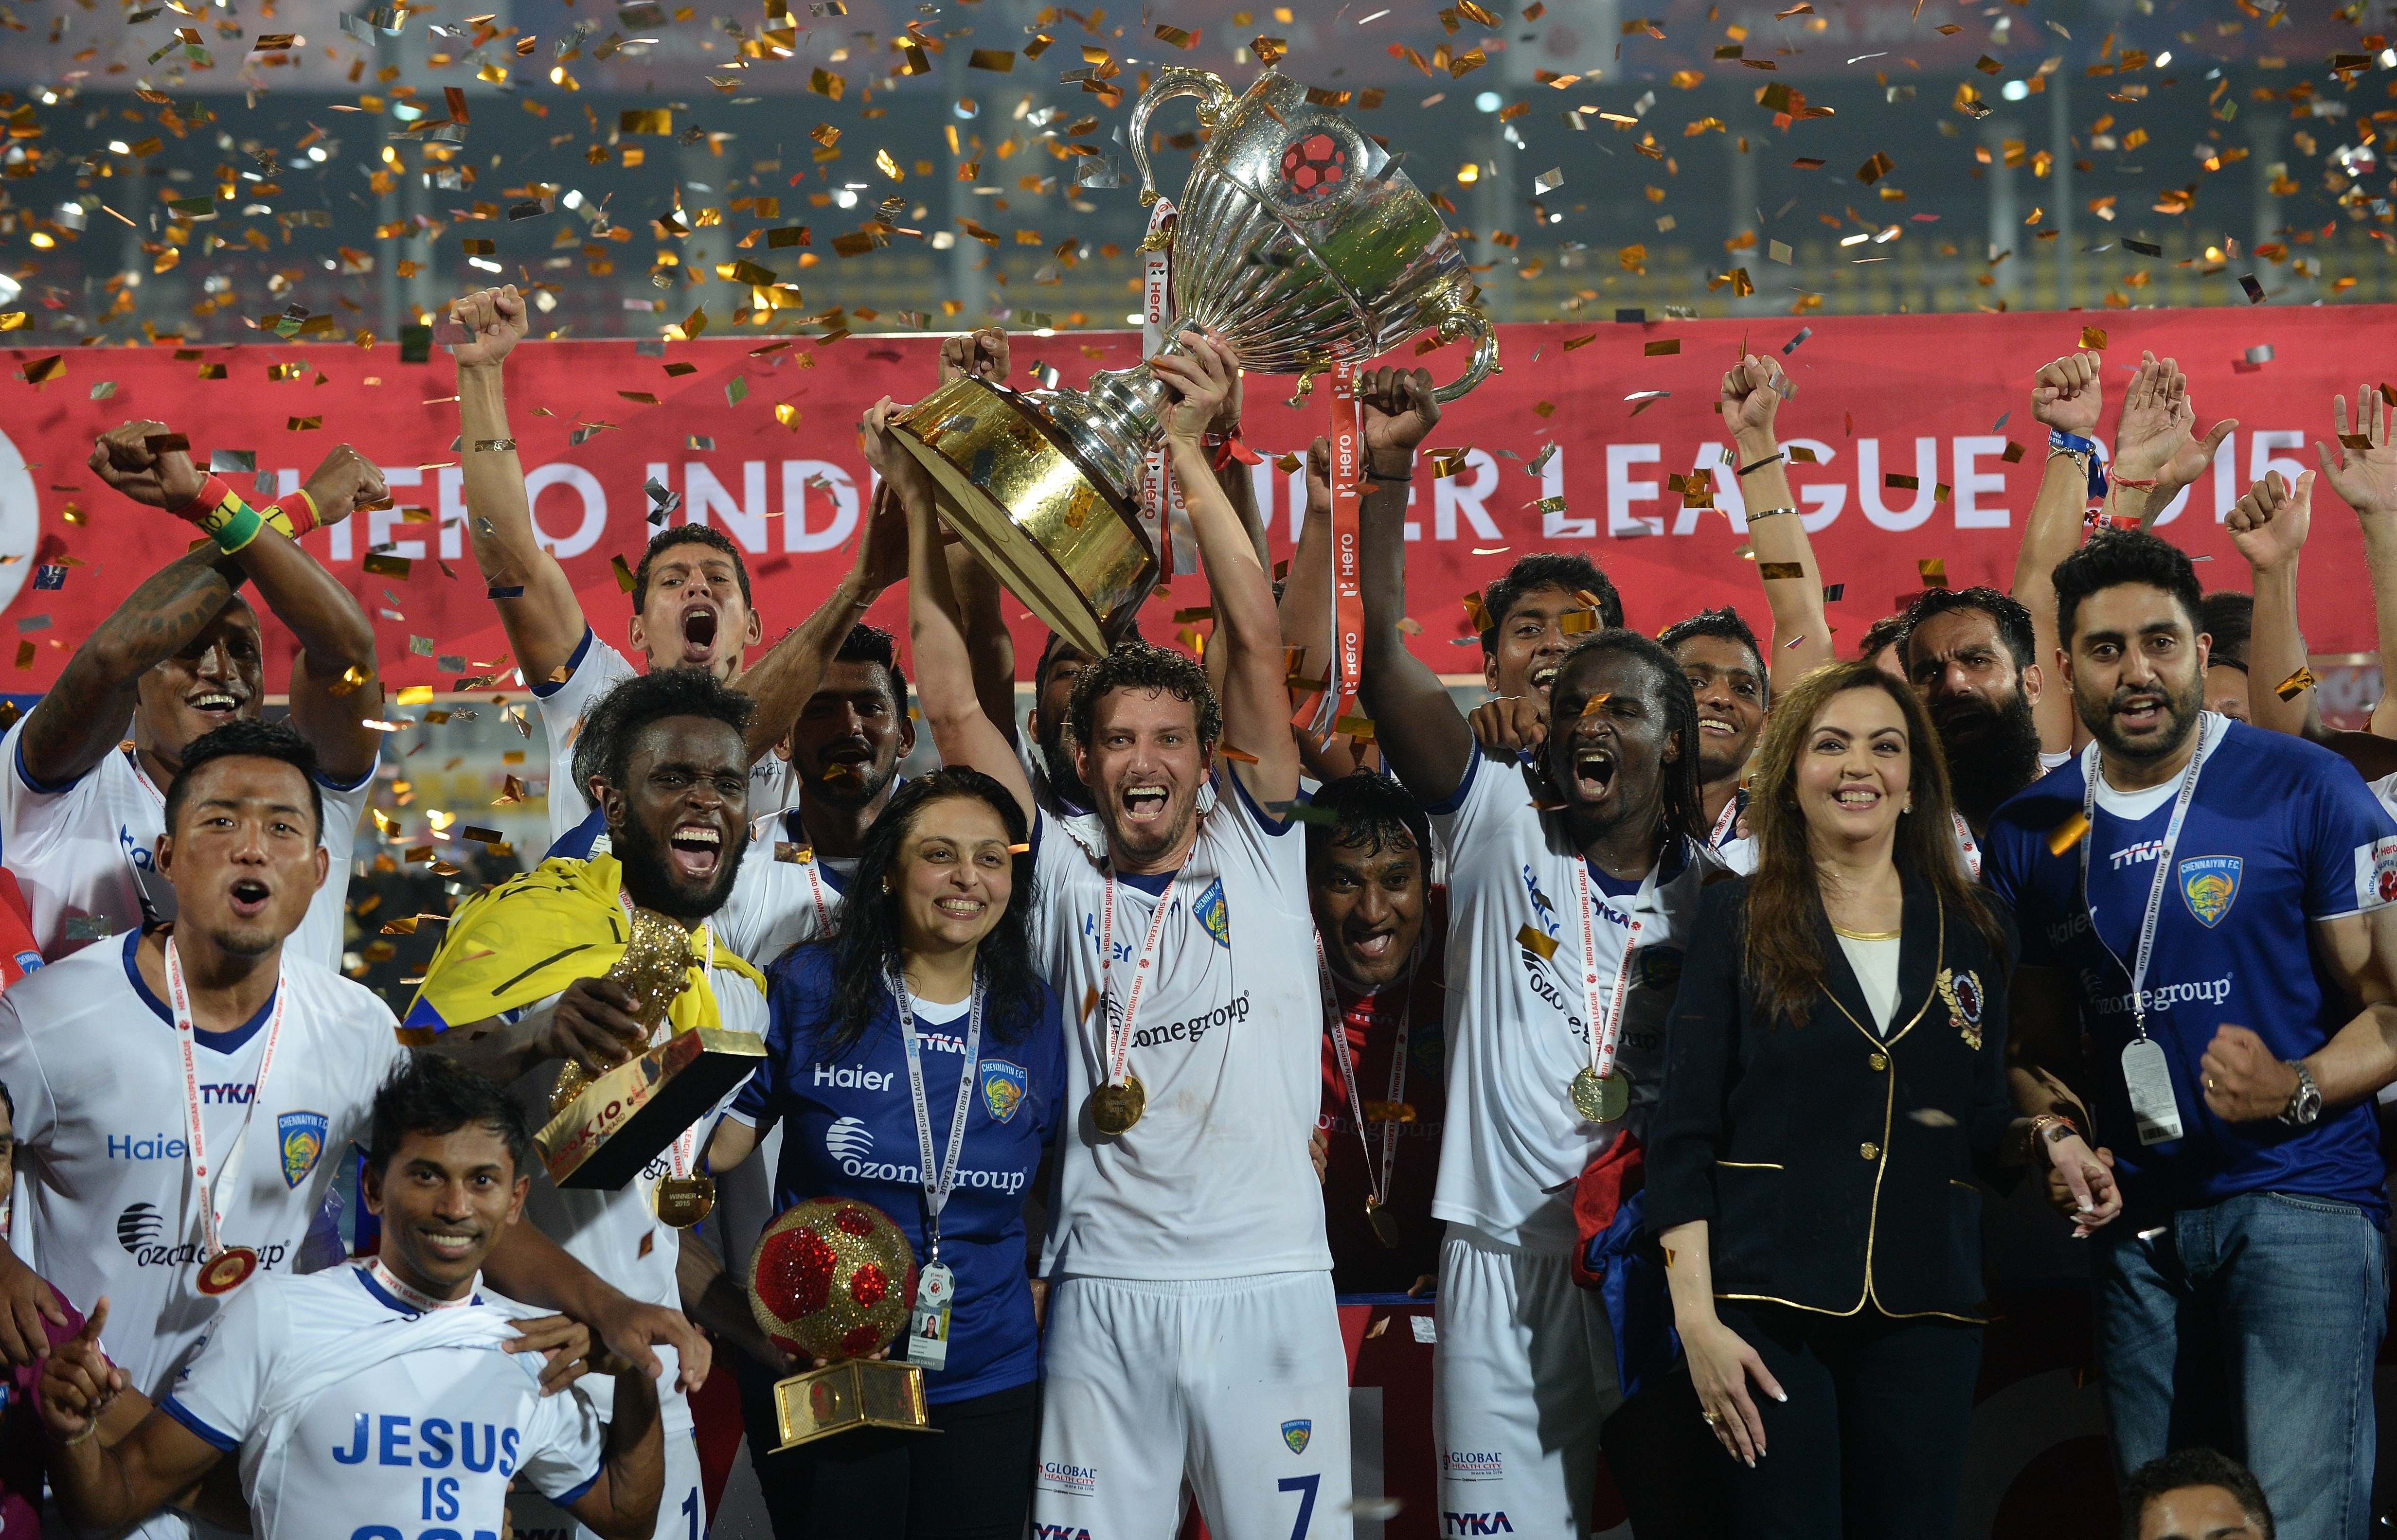 Chennaiyin FC players pose with the trophy as they celebrate along with Bollywood actor Abhishek Bachchan (R) and Nita Ambani (3R) after winning the final match against FC Goa during the Indian Super League (ISL) football tournament at Jawahar Lal Nehru Stadium in Goa on December 20, 2015.  AFP PHOTO / PUNIT PARANJPE / AFP / PUNIT PARANJPE        (Photo credit should read PUNIT PARANJPE/AFP/Getty Images)